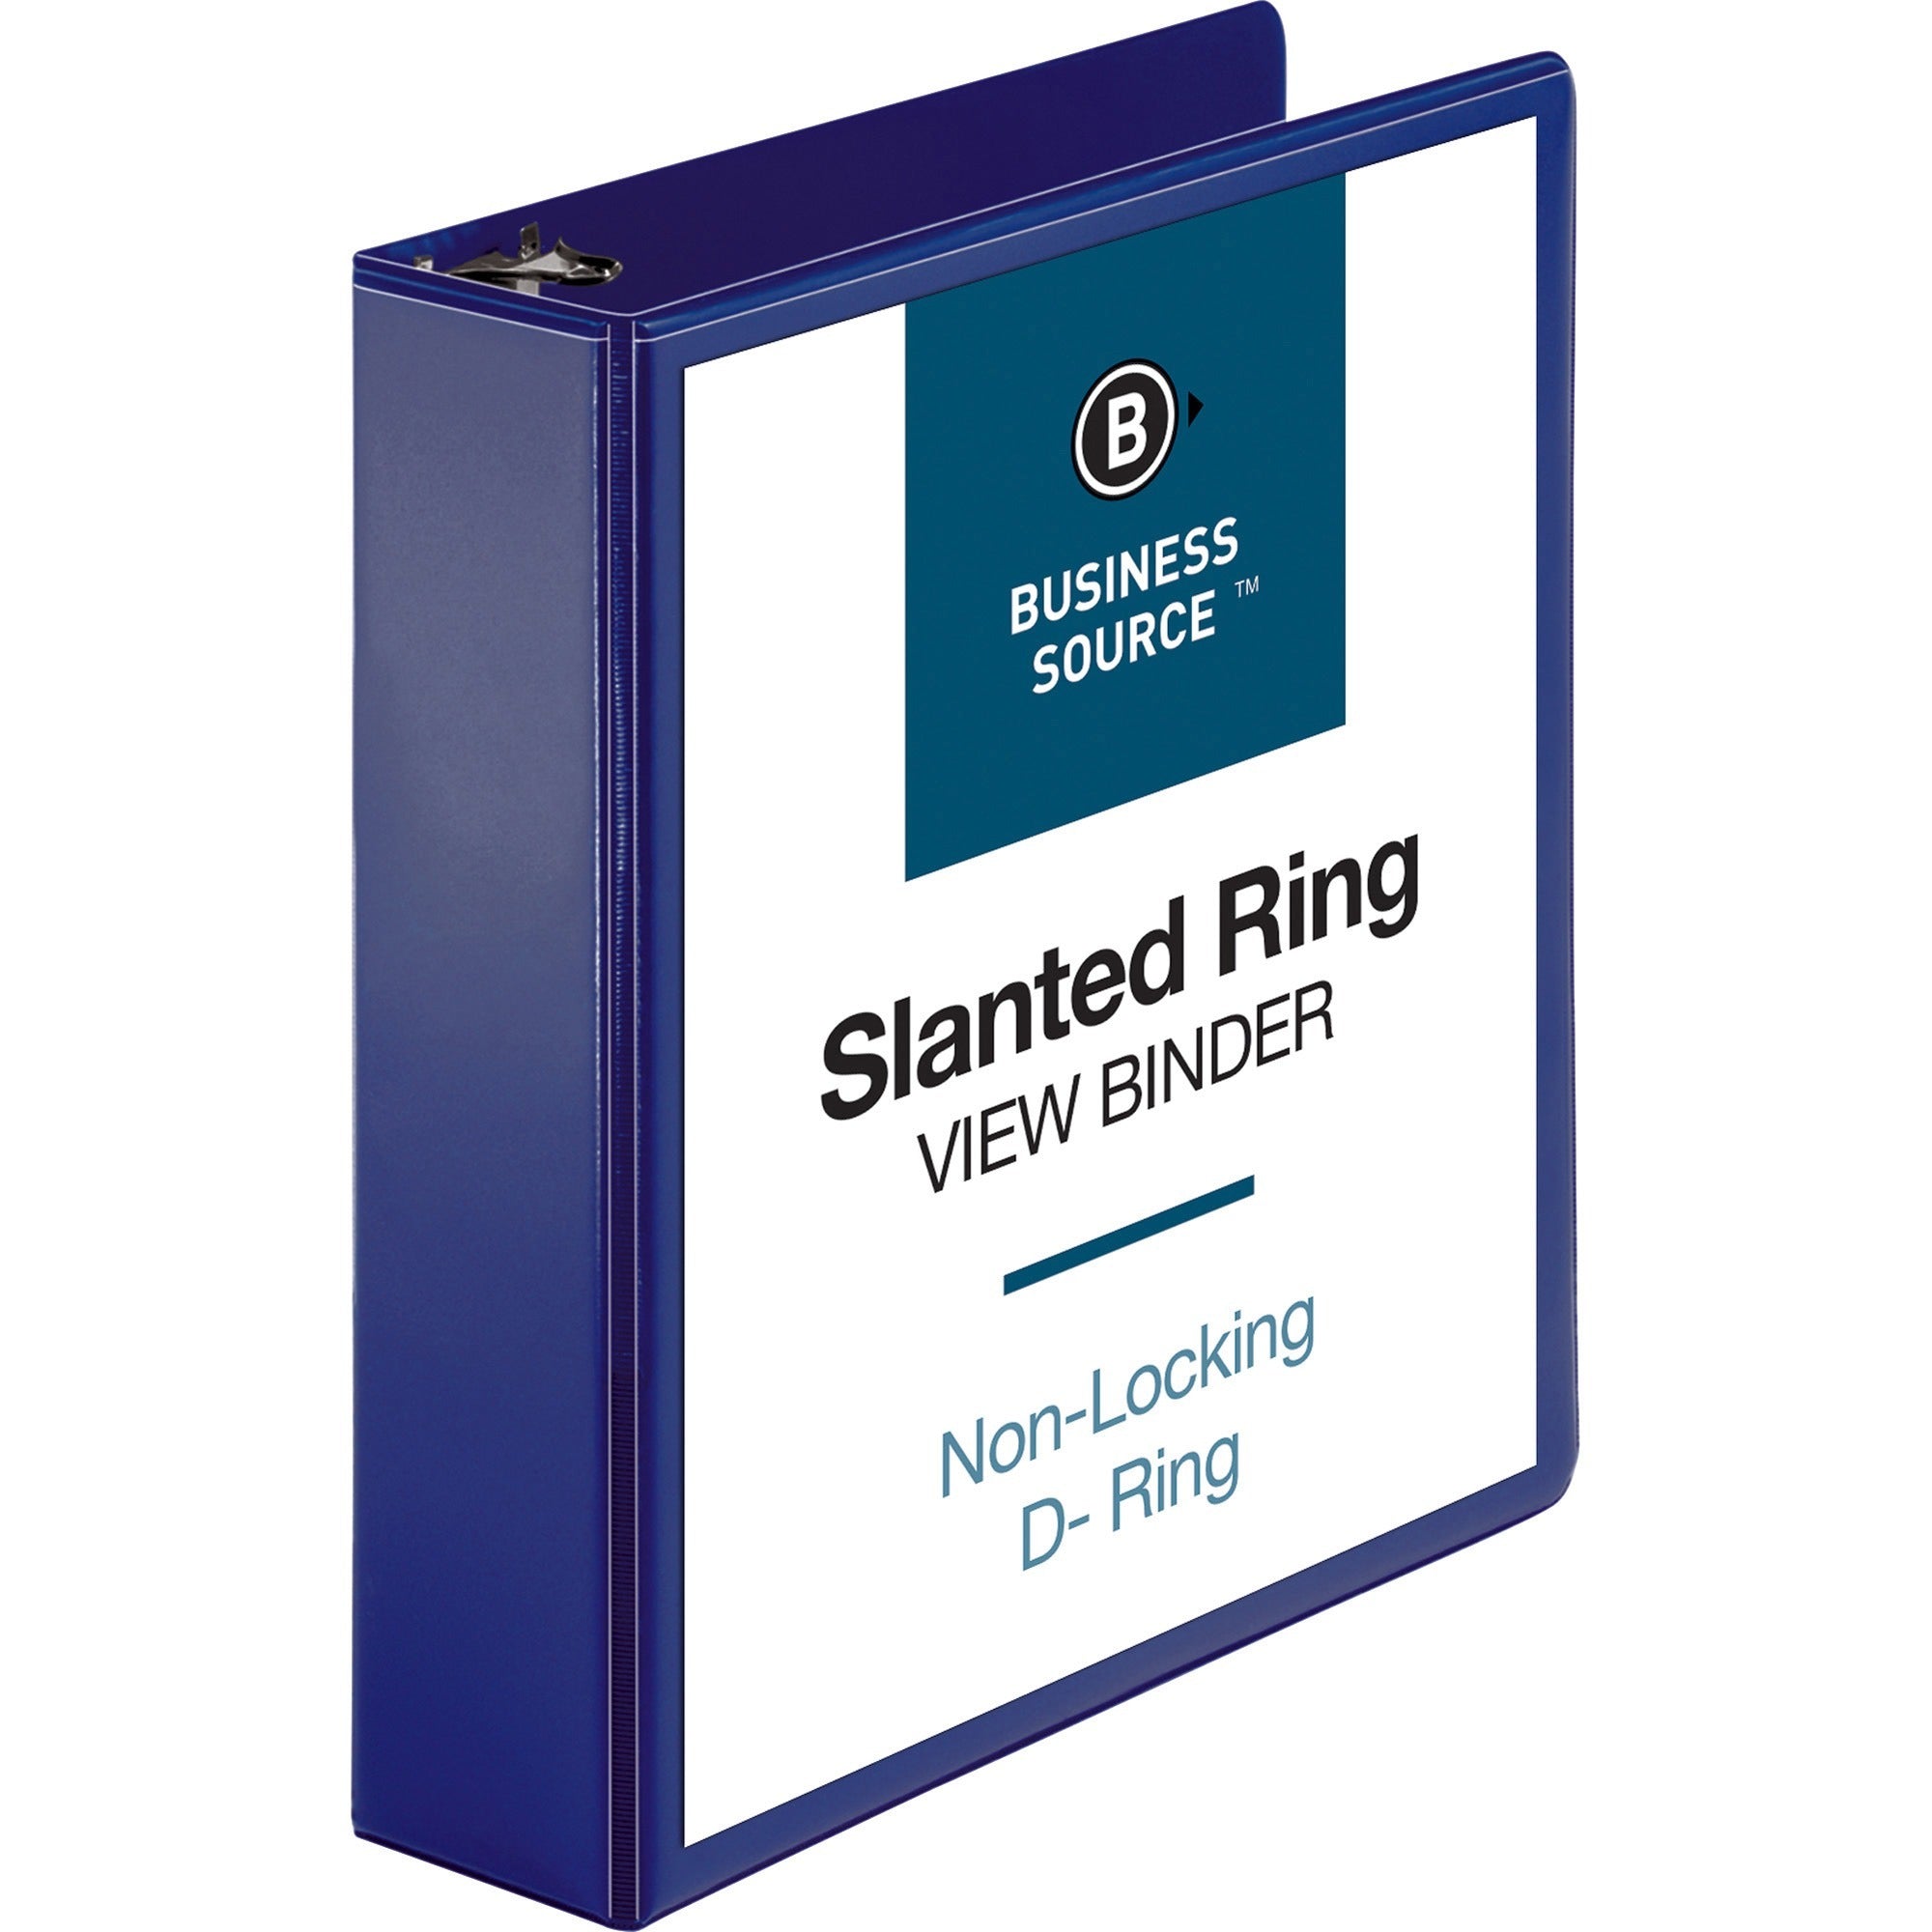 business-source-d-ring-view-binder-2-binder-capacity-slant-d-ring-fasteners-internal-pockets-navy-clear-overlay-labeling-area-lay-flat-pocket-1-each_bsn28454 - 1